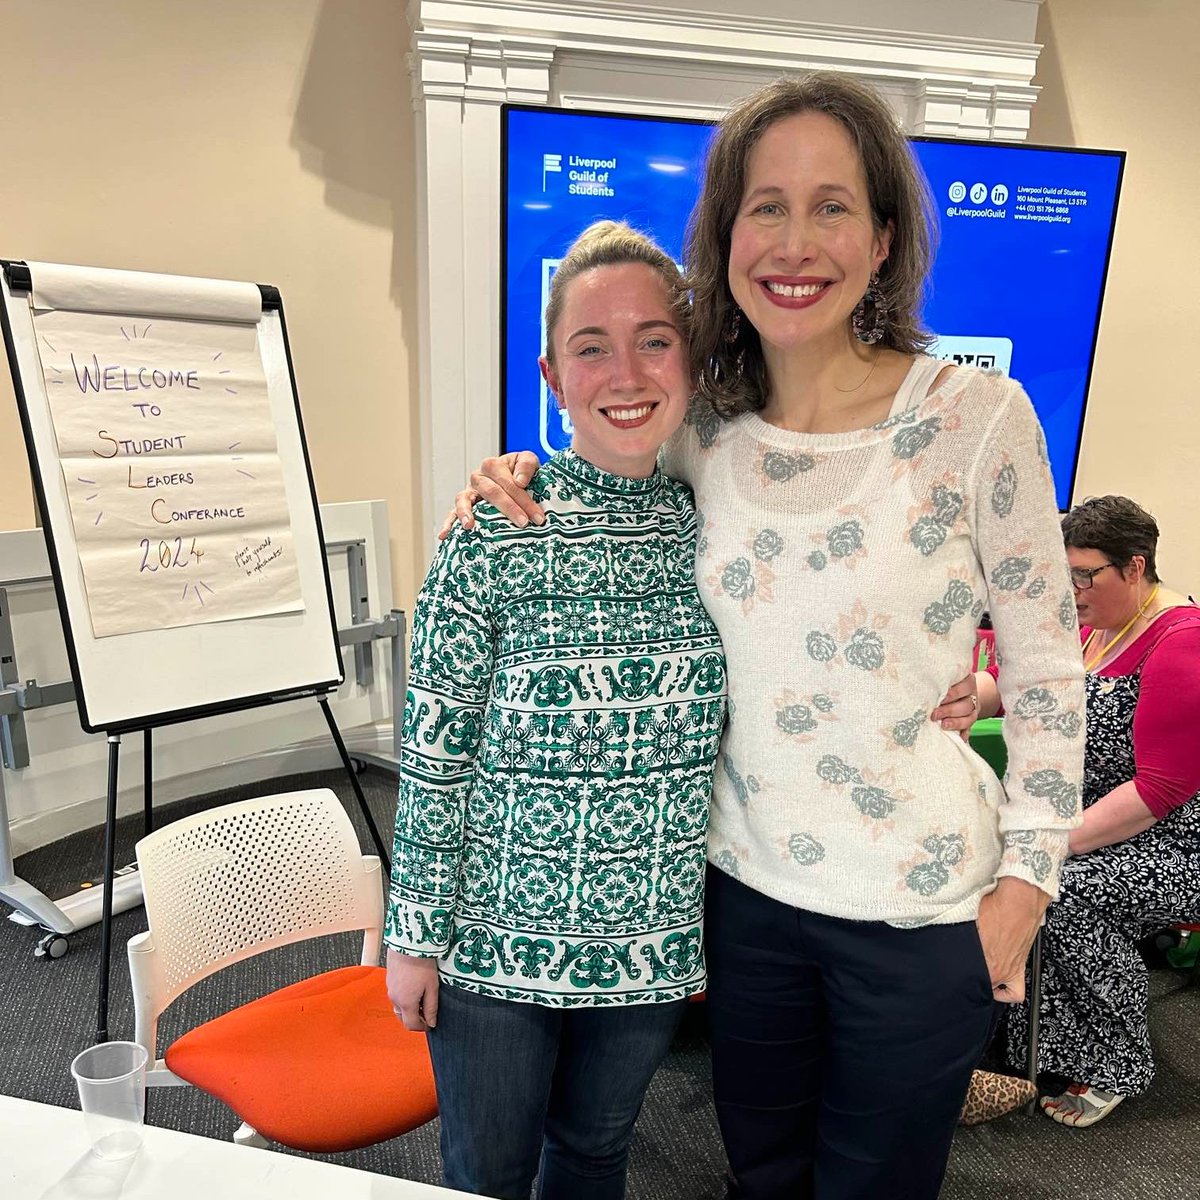 It was uplifting to be part of the Student Leaders Conference @LiverpoolGuild today! My fellow panellists included Hannah from @ActionTutoring (pictured w/ me) Vanessa, Ema & David, @DiabetesUK @ChoirwithNoName @GoodGymLpool @WhitechapelLiv , respectively.